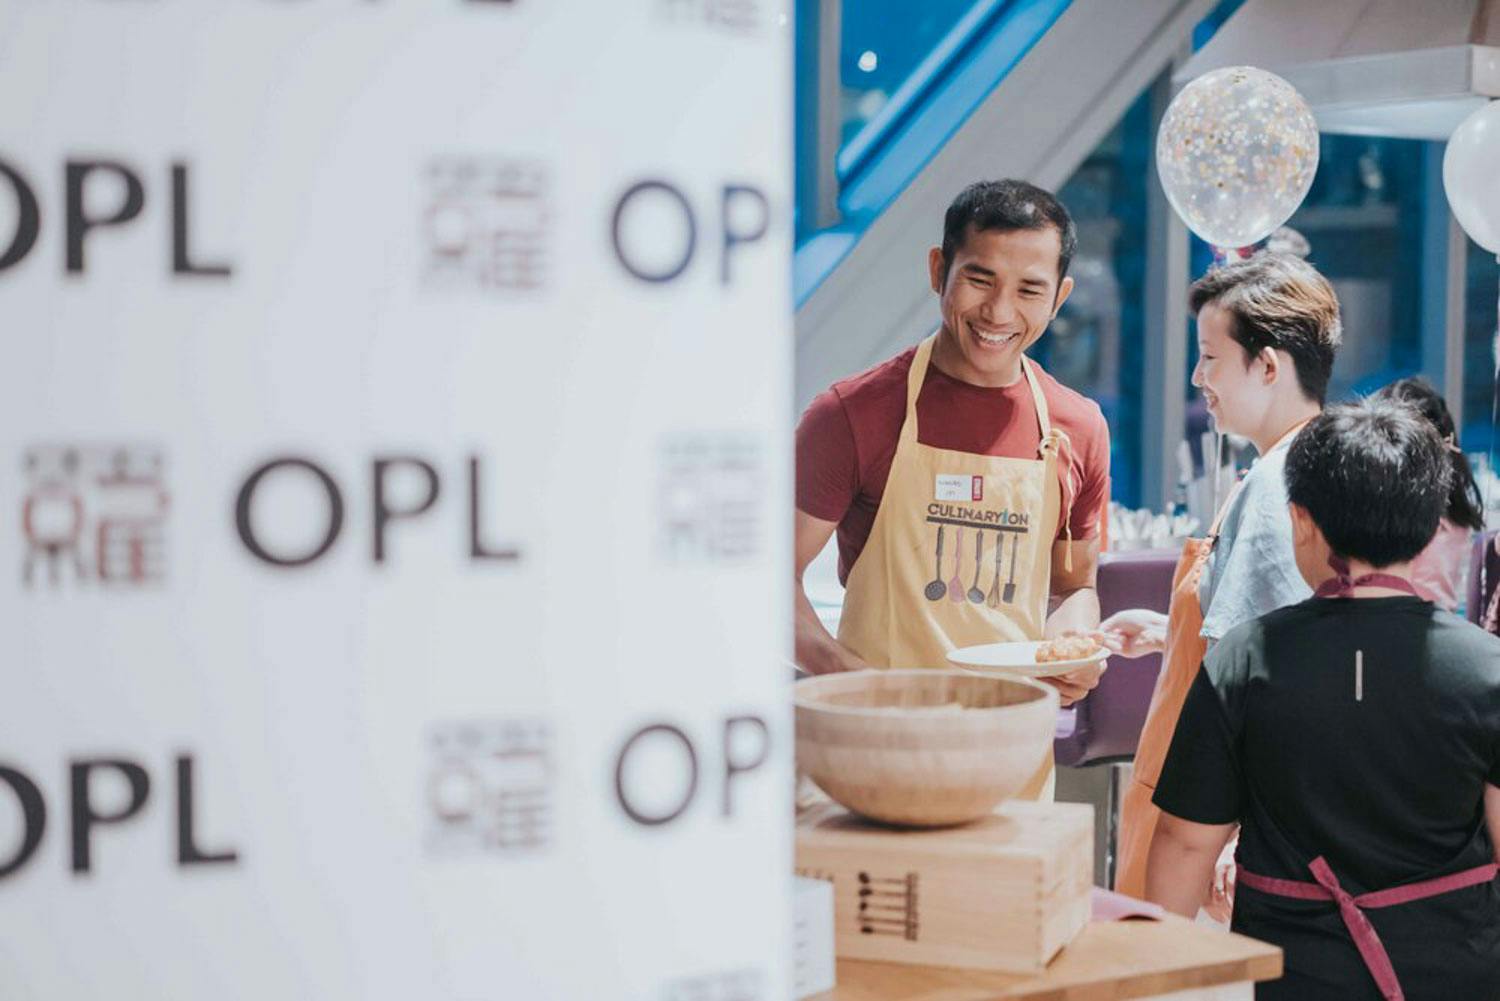 guy smiling behind corporate banner while learning how to bake during a corporate event in Singapore